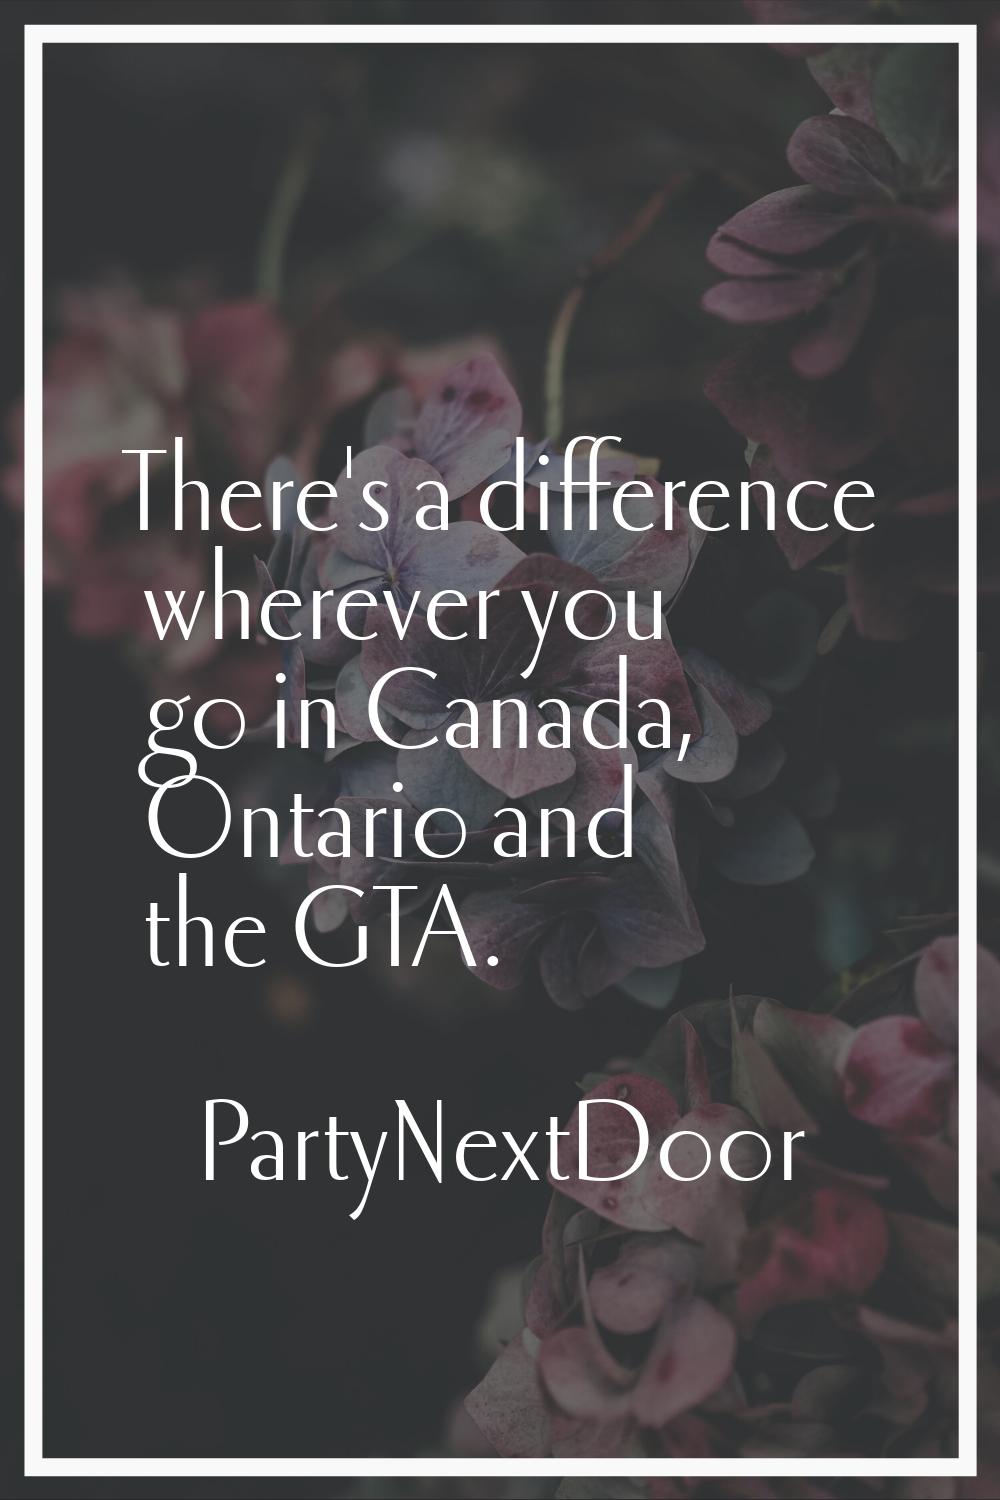 There's a difference wherever you go in Canada, Ontario and the GTA.